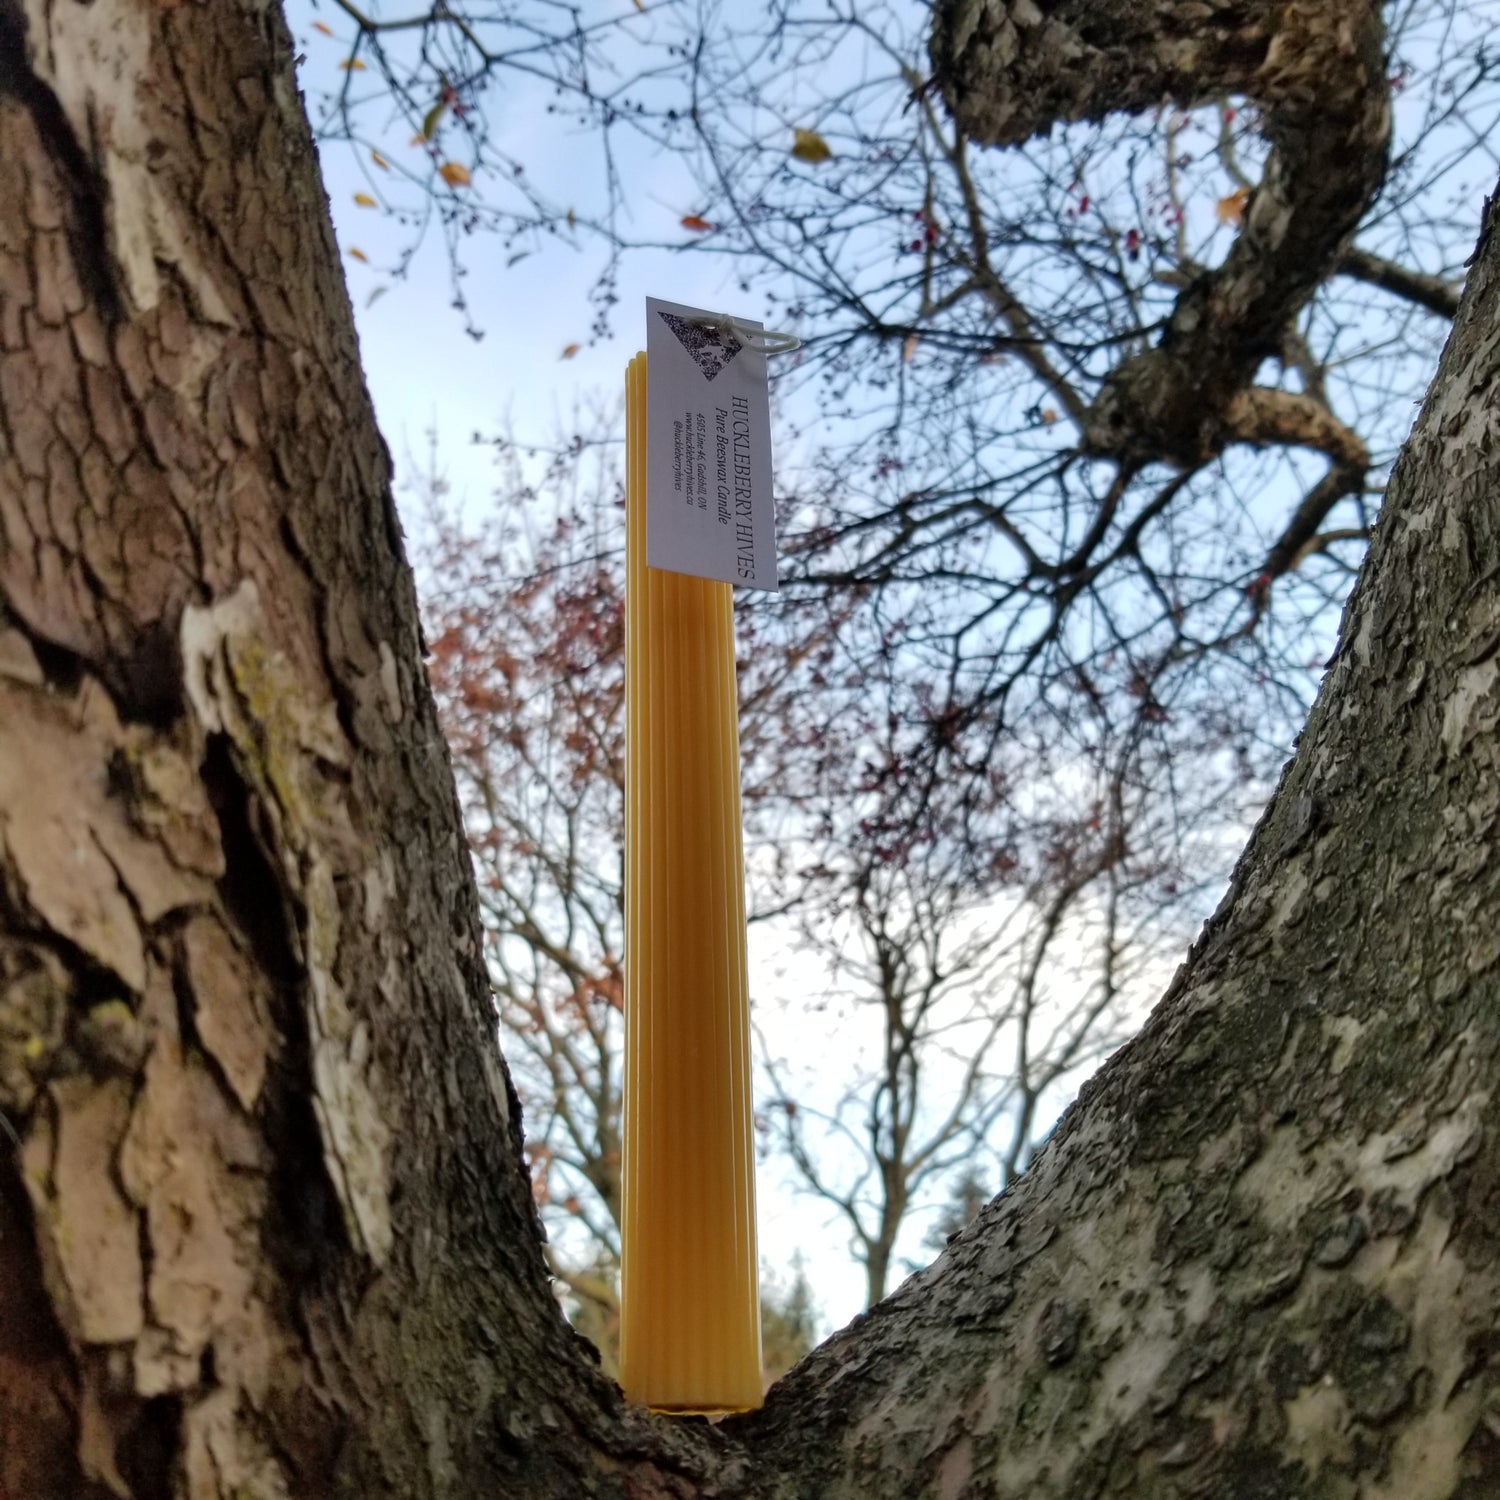 beeswax fluted taper candle sitting in a crook of a tree branch